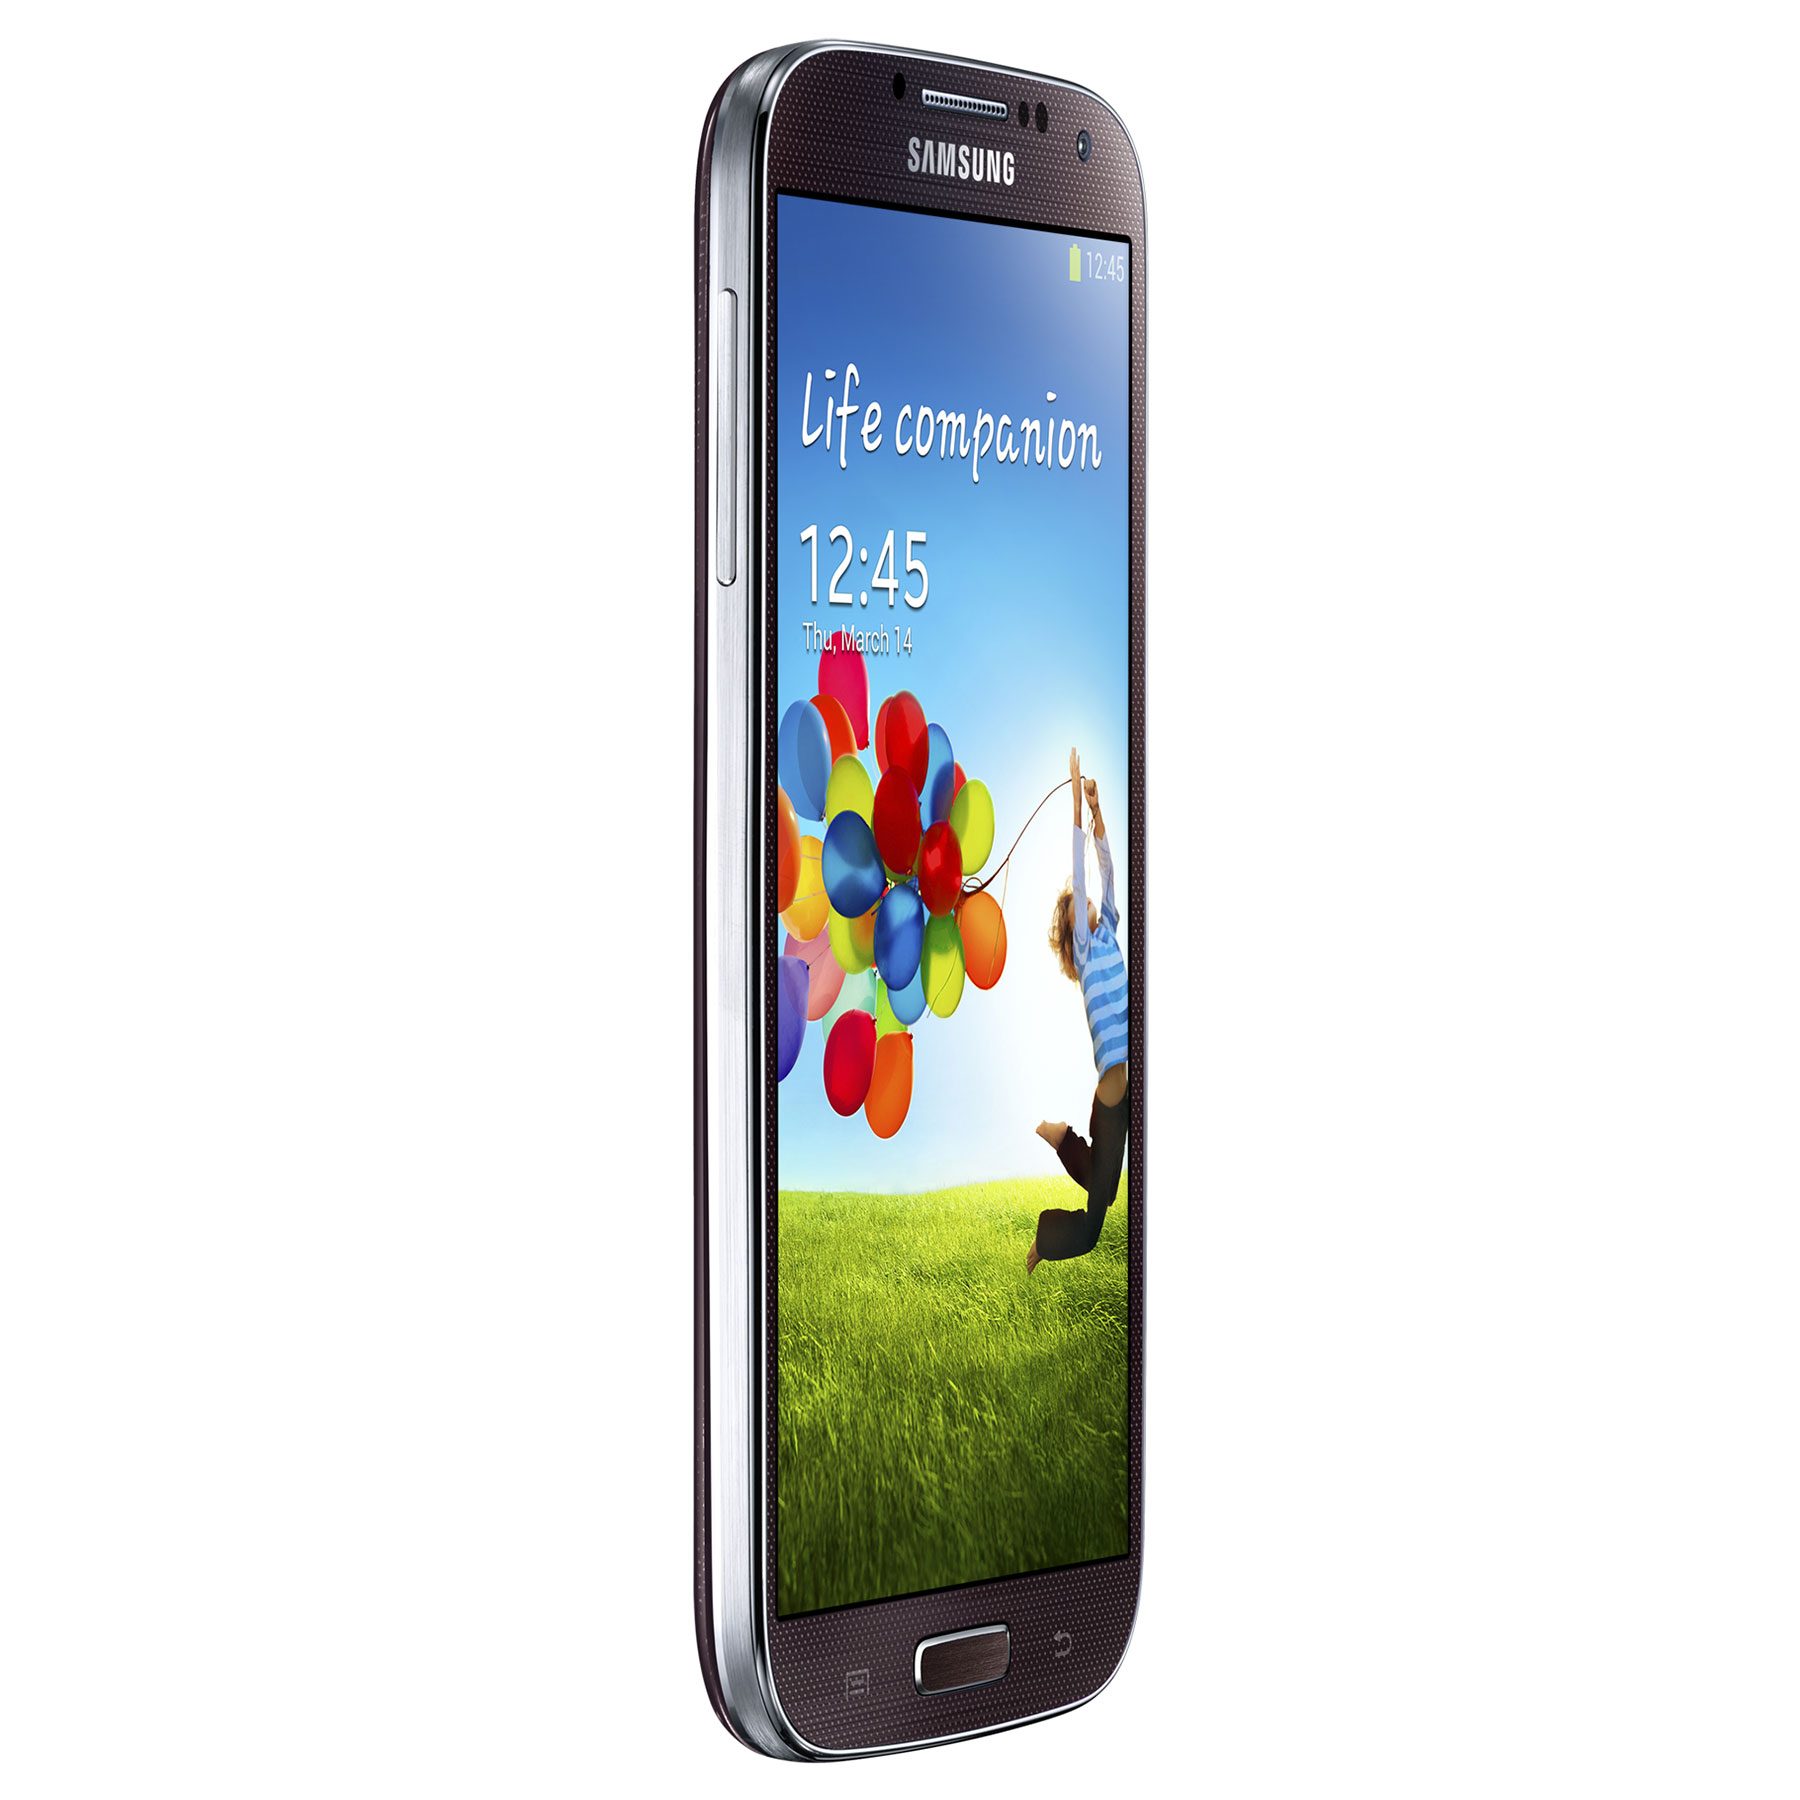 Samsung Galaxy S4 Gt I9505 Brown Mirage 16 Go Mobile And Smartphone